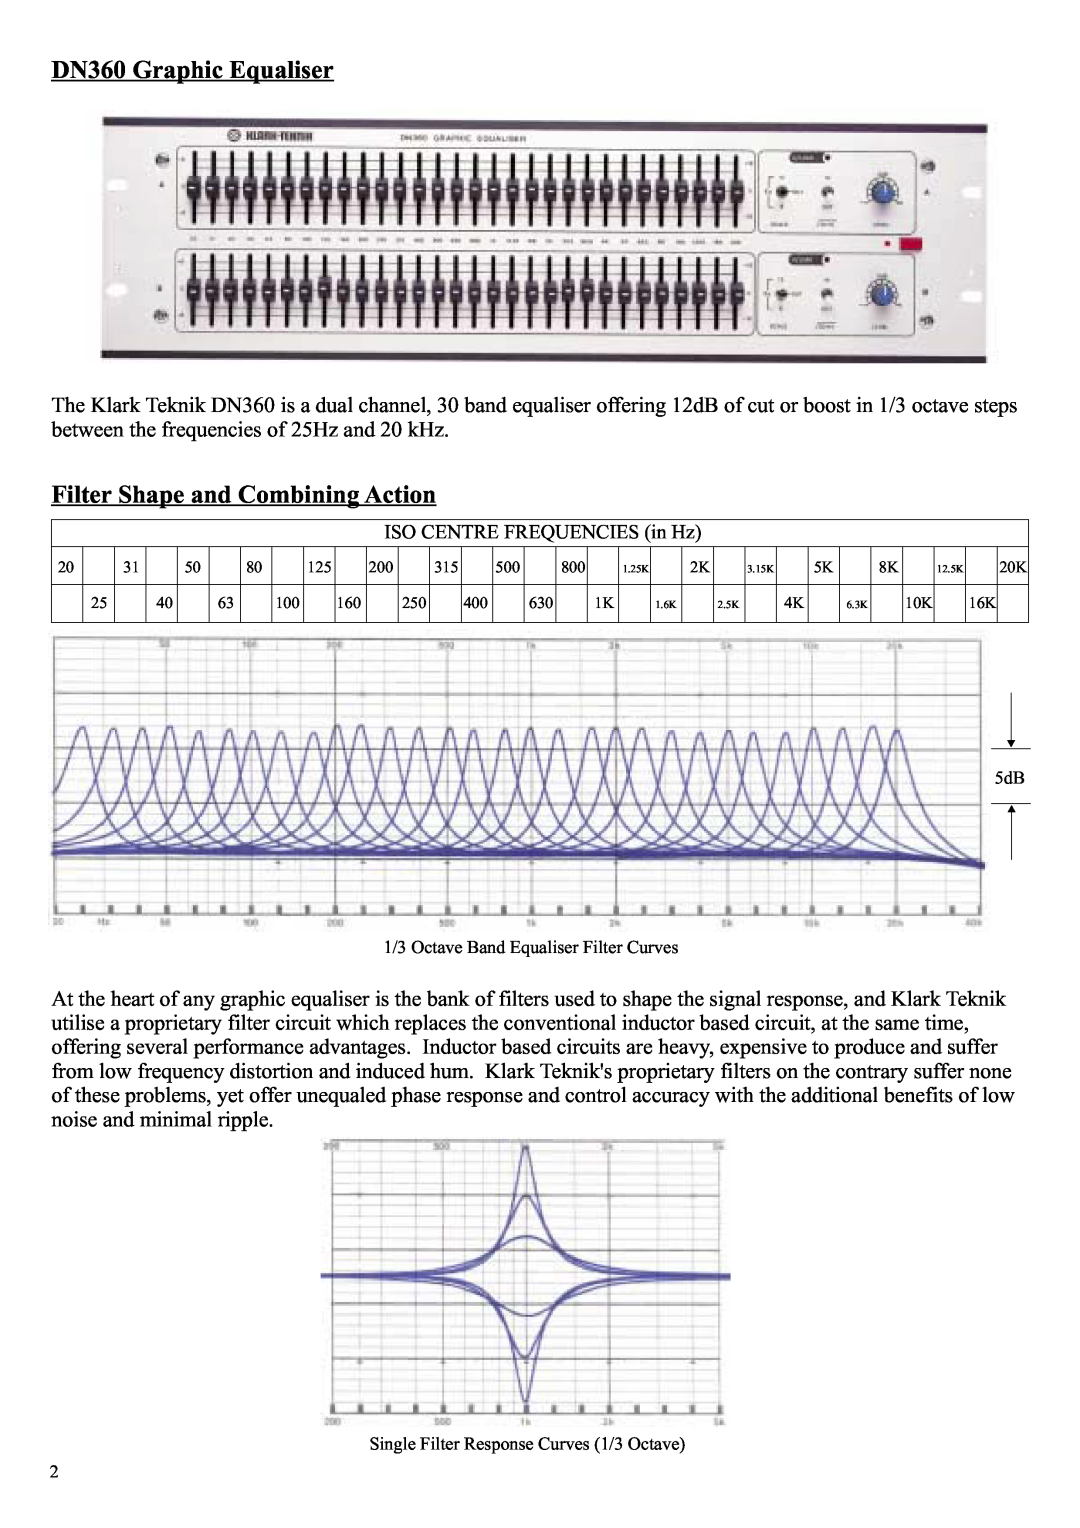 Klark Teknik manual DN360 Graphic Equaliser, Filter Shape and Combining Action, ISO CENTRE FREQUENCIES in Hz 